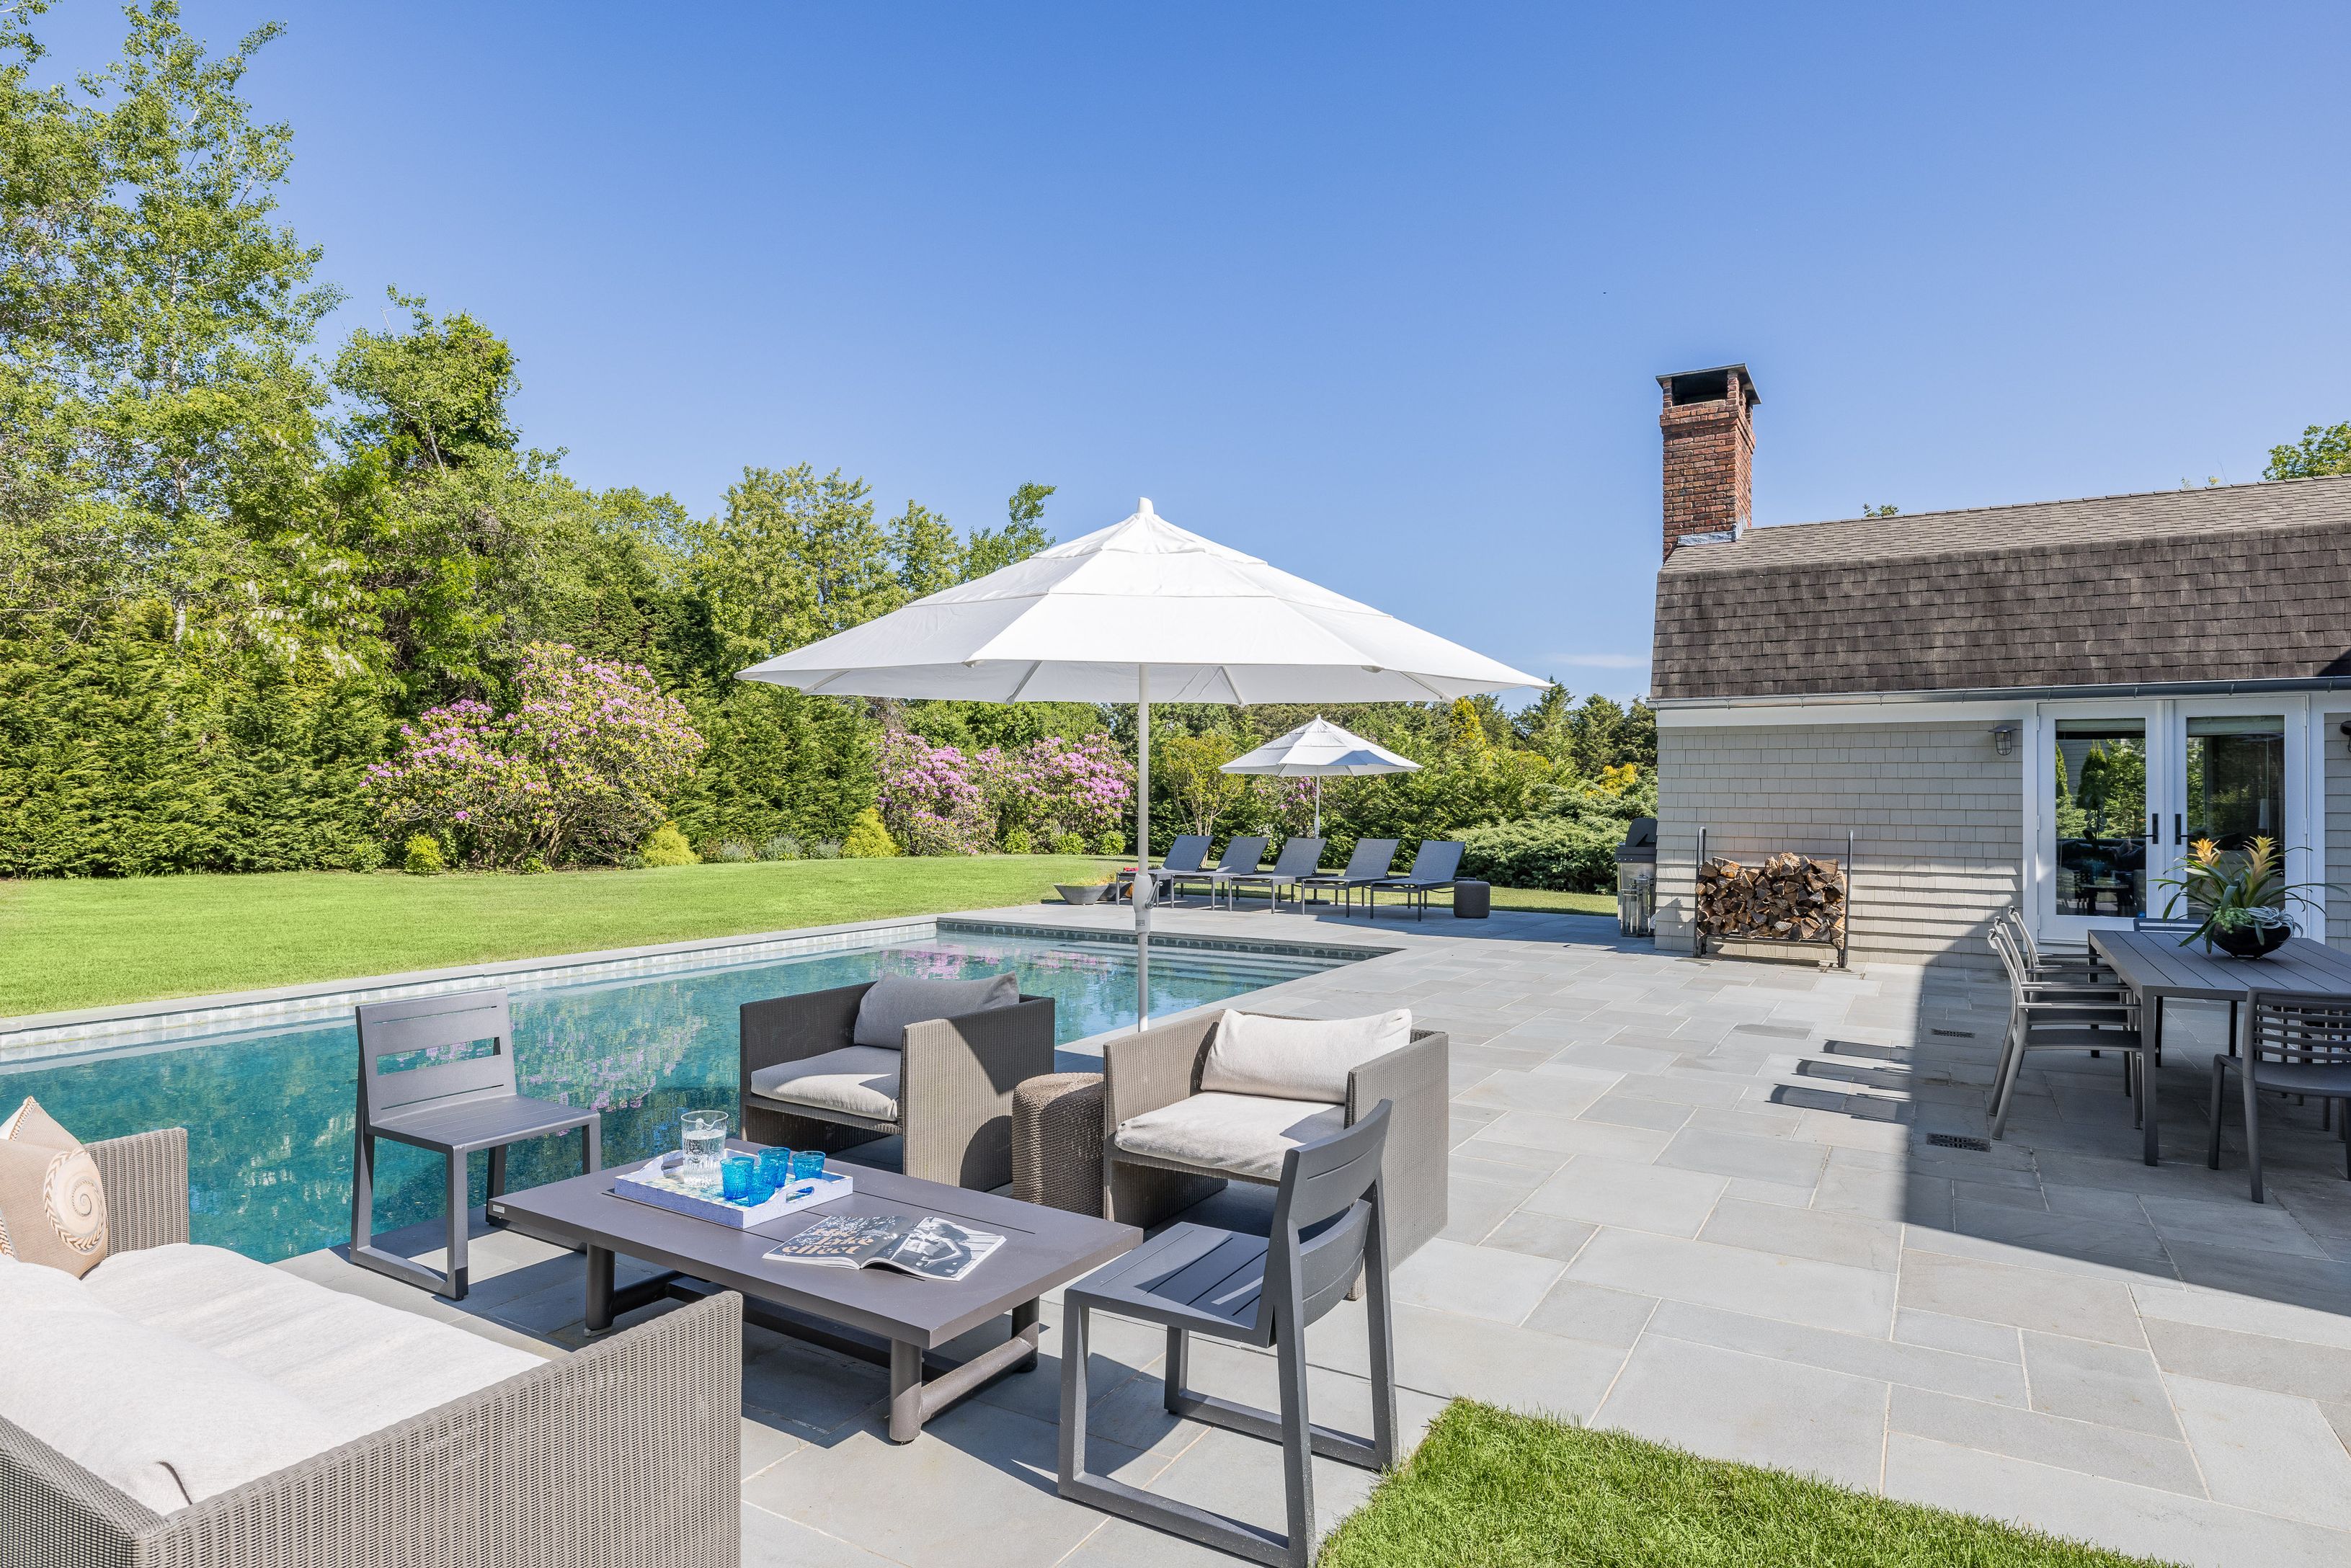 a patio with tables and chairs pool and a fire pit with the wooden fence